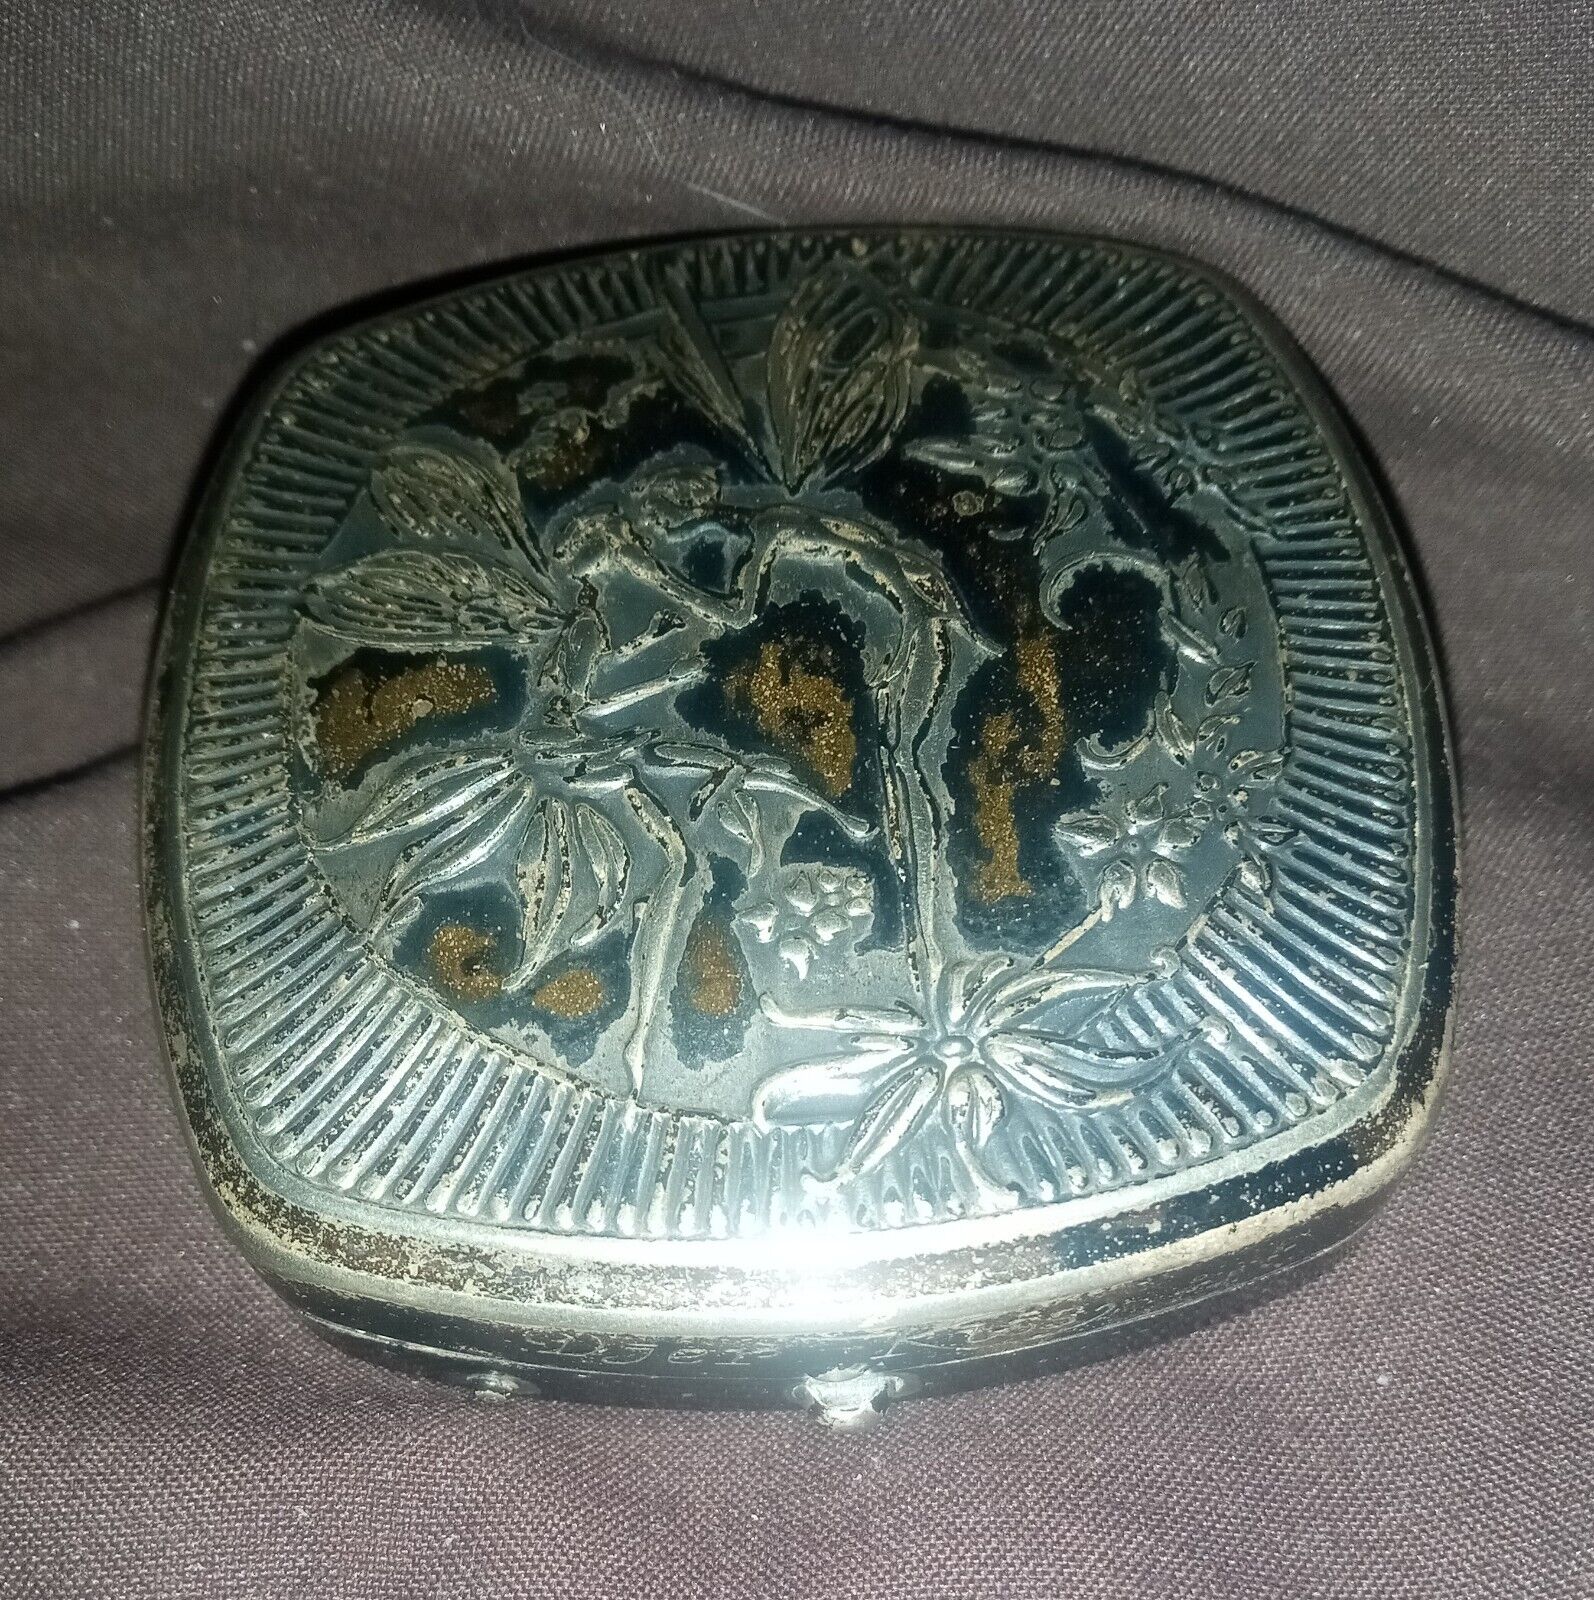 Antique 1920’s DJER -KISS Kerkoff Kissing Fairies Silverplate Compact Mirror 